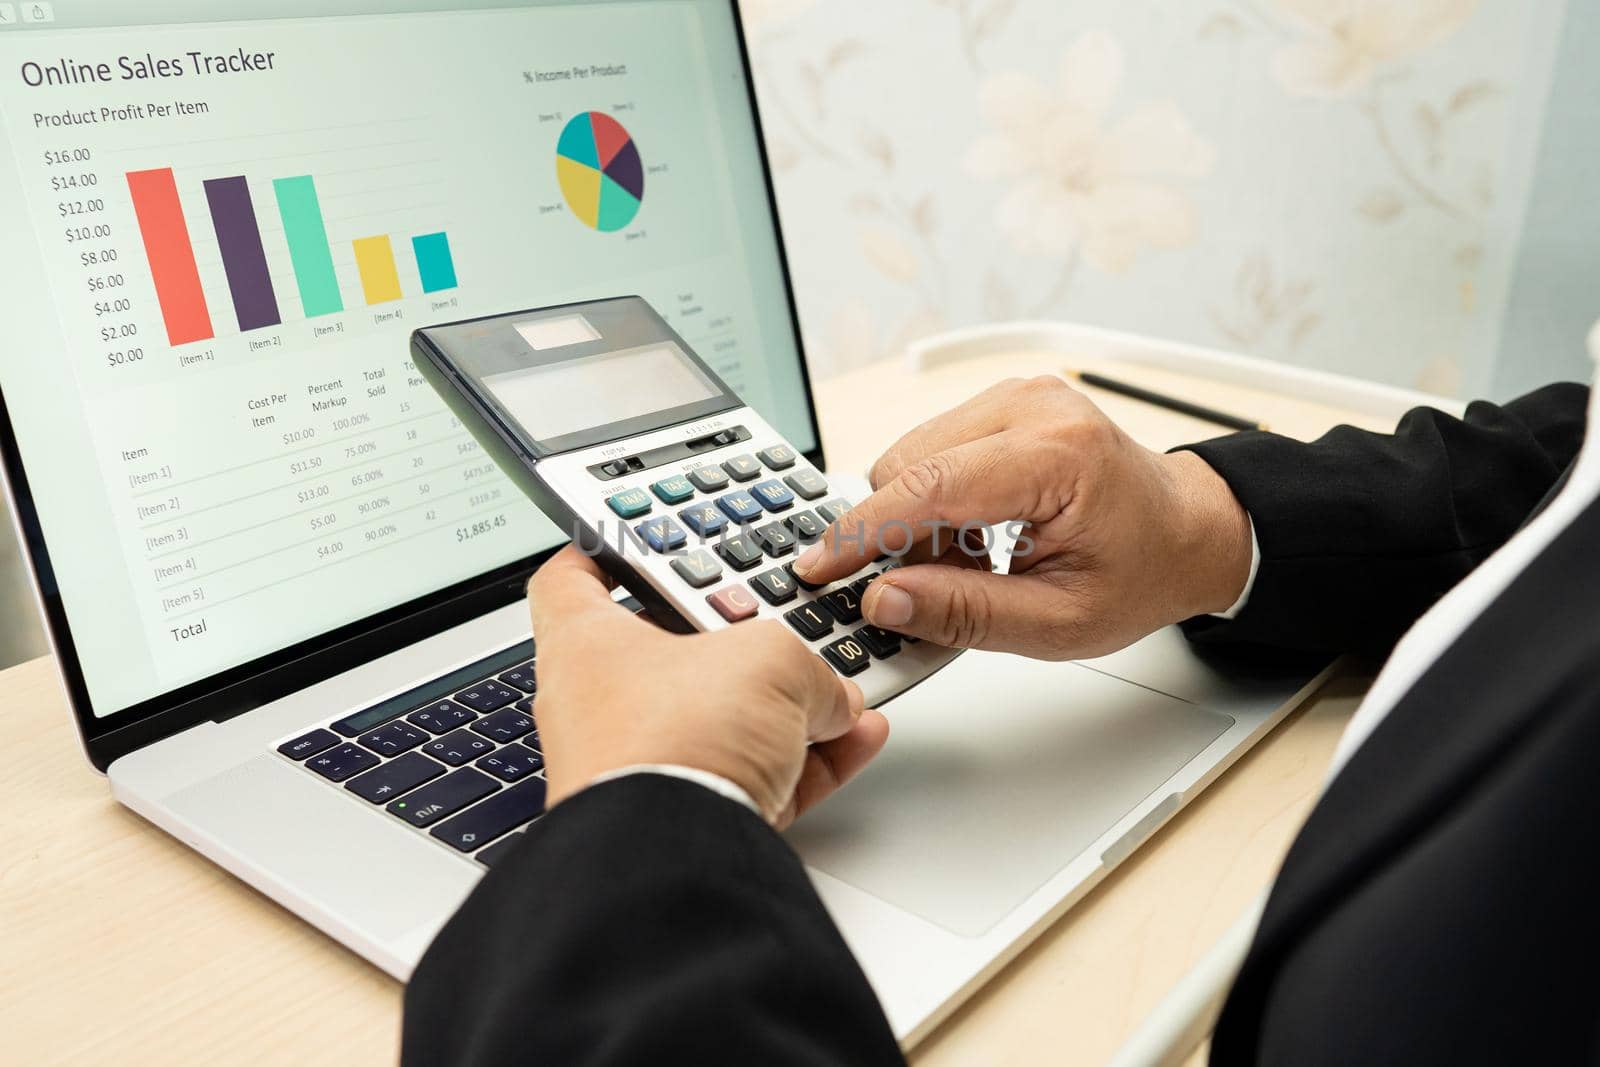 Asian accountant working and analyzing financial reports project accounting with chart graph and calculator in modern office, finance and business concept. by pamai